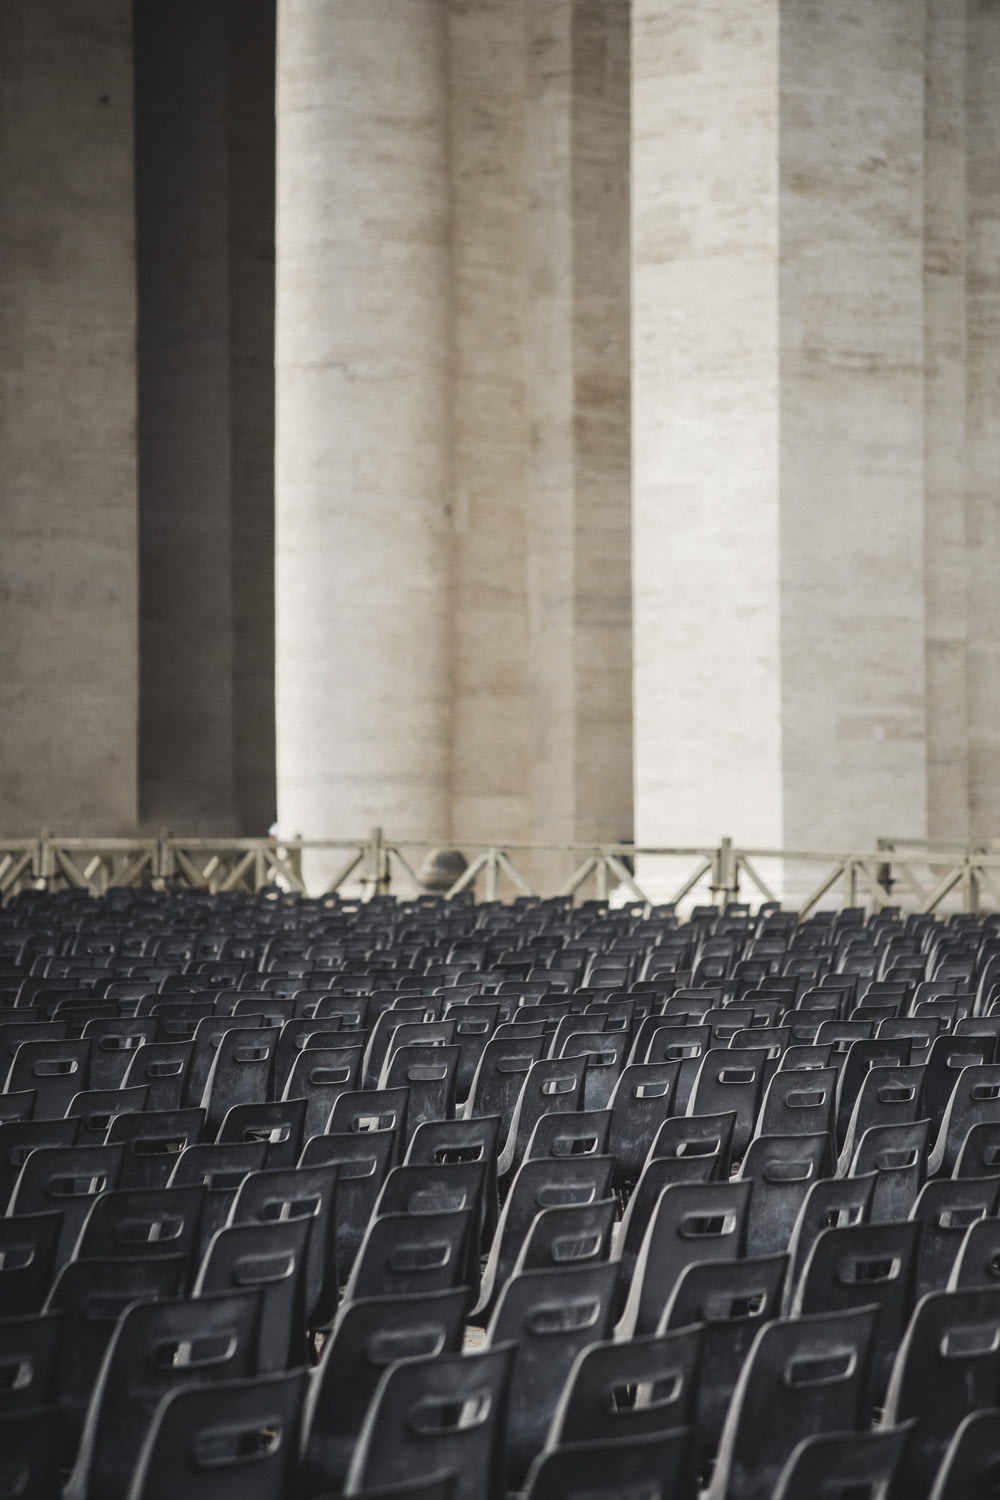 rows of black chairs in front of columns